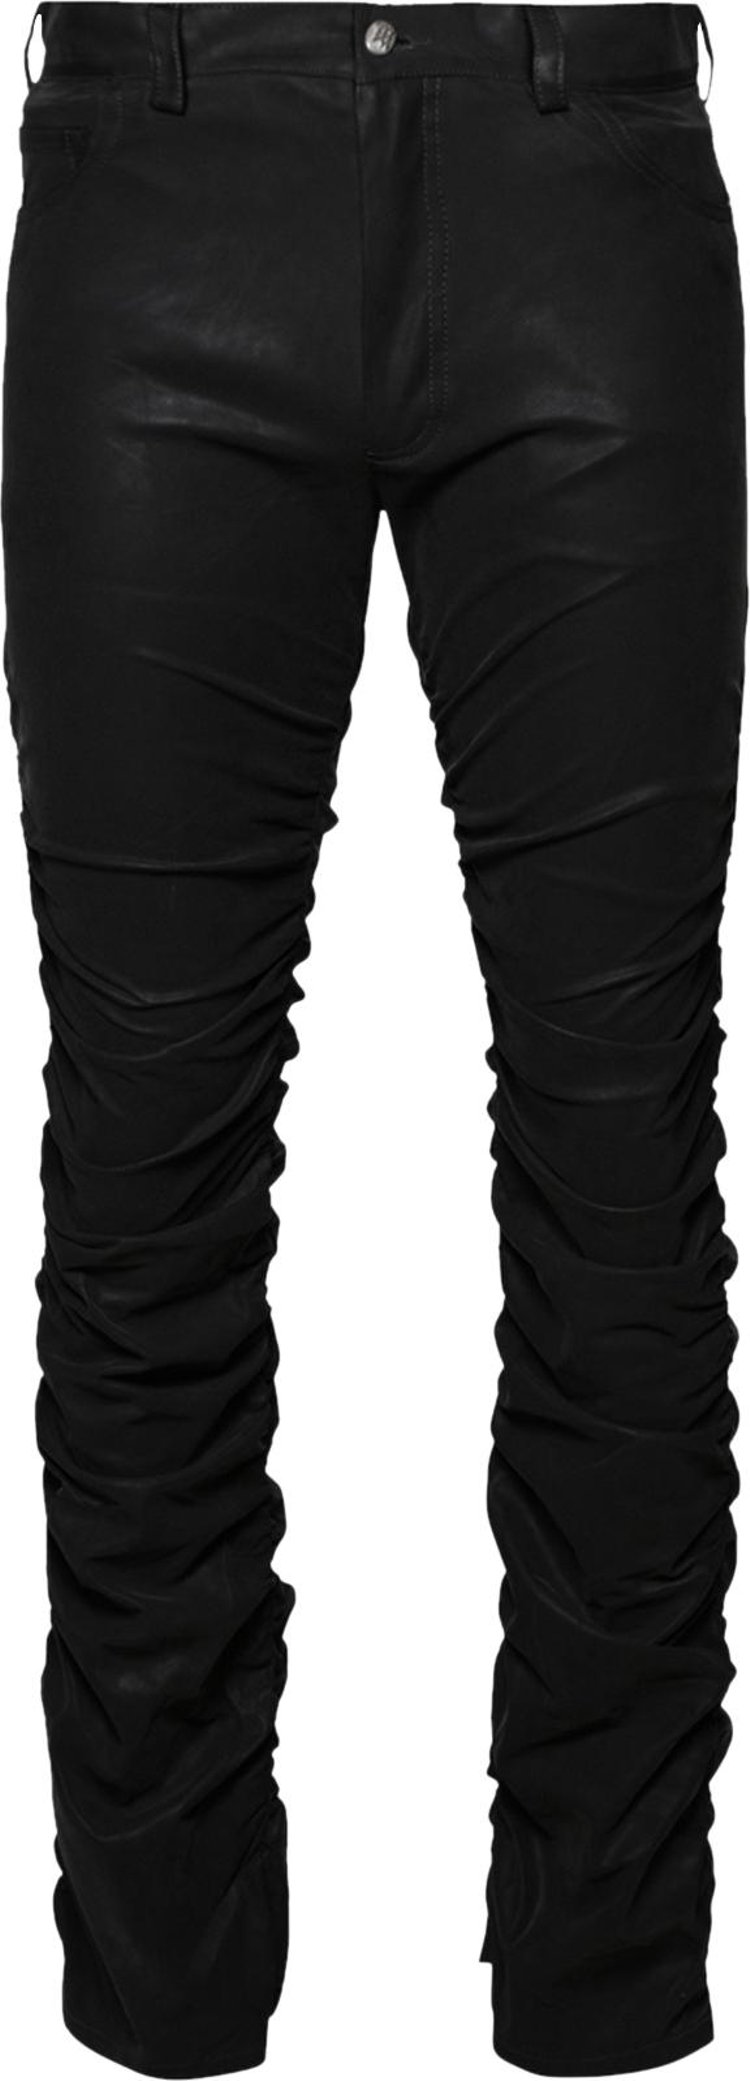 MISBHV Vegan Leather Ruched Trousers 'Faded Black'